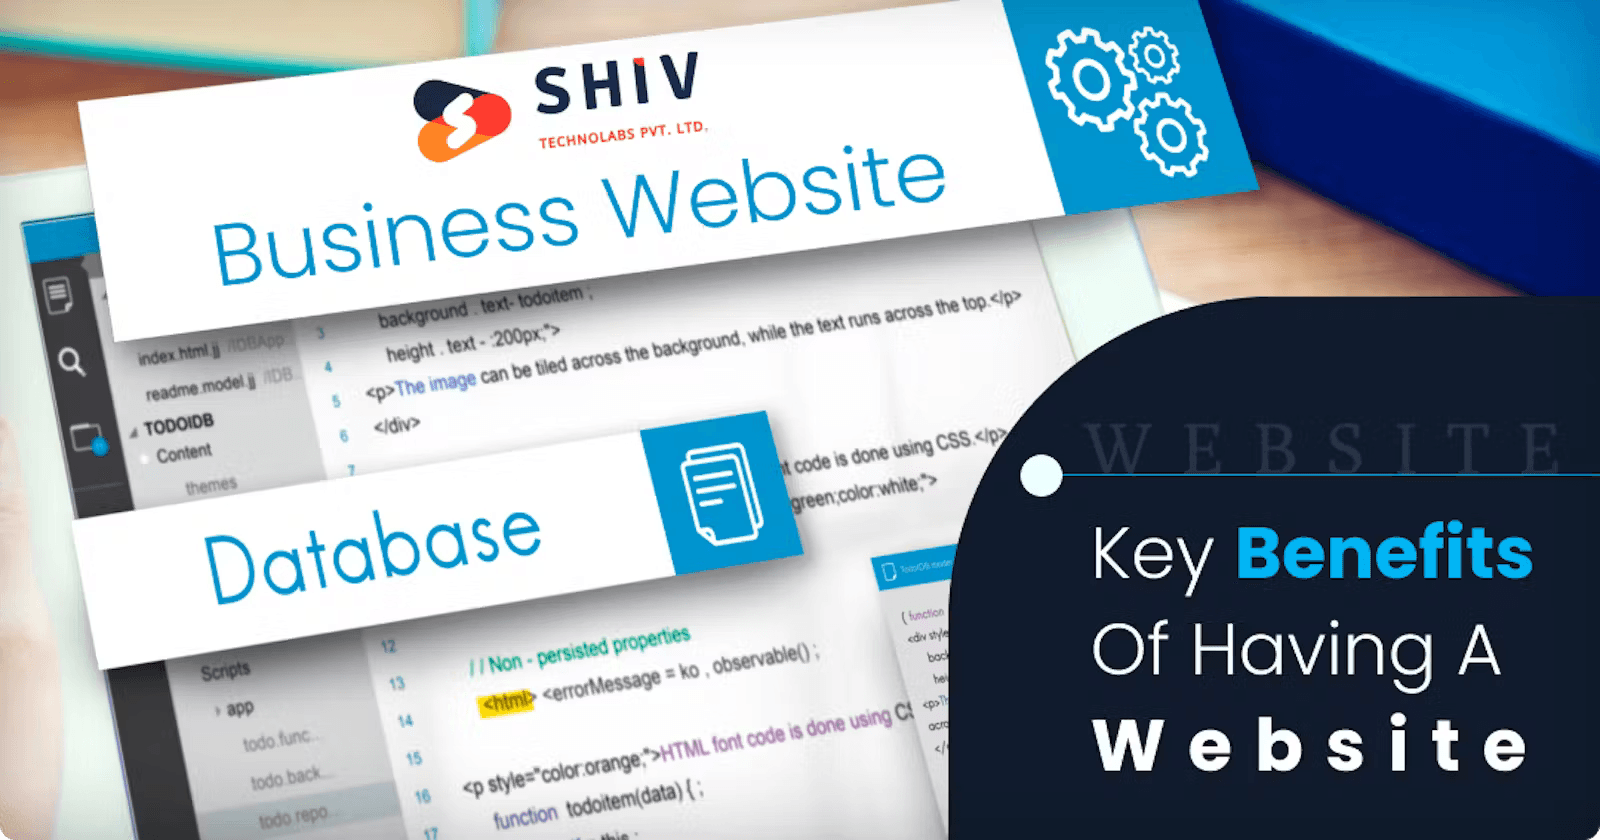 Key Benefits of Having a Website For Your Business